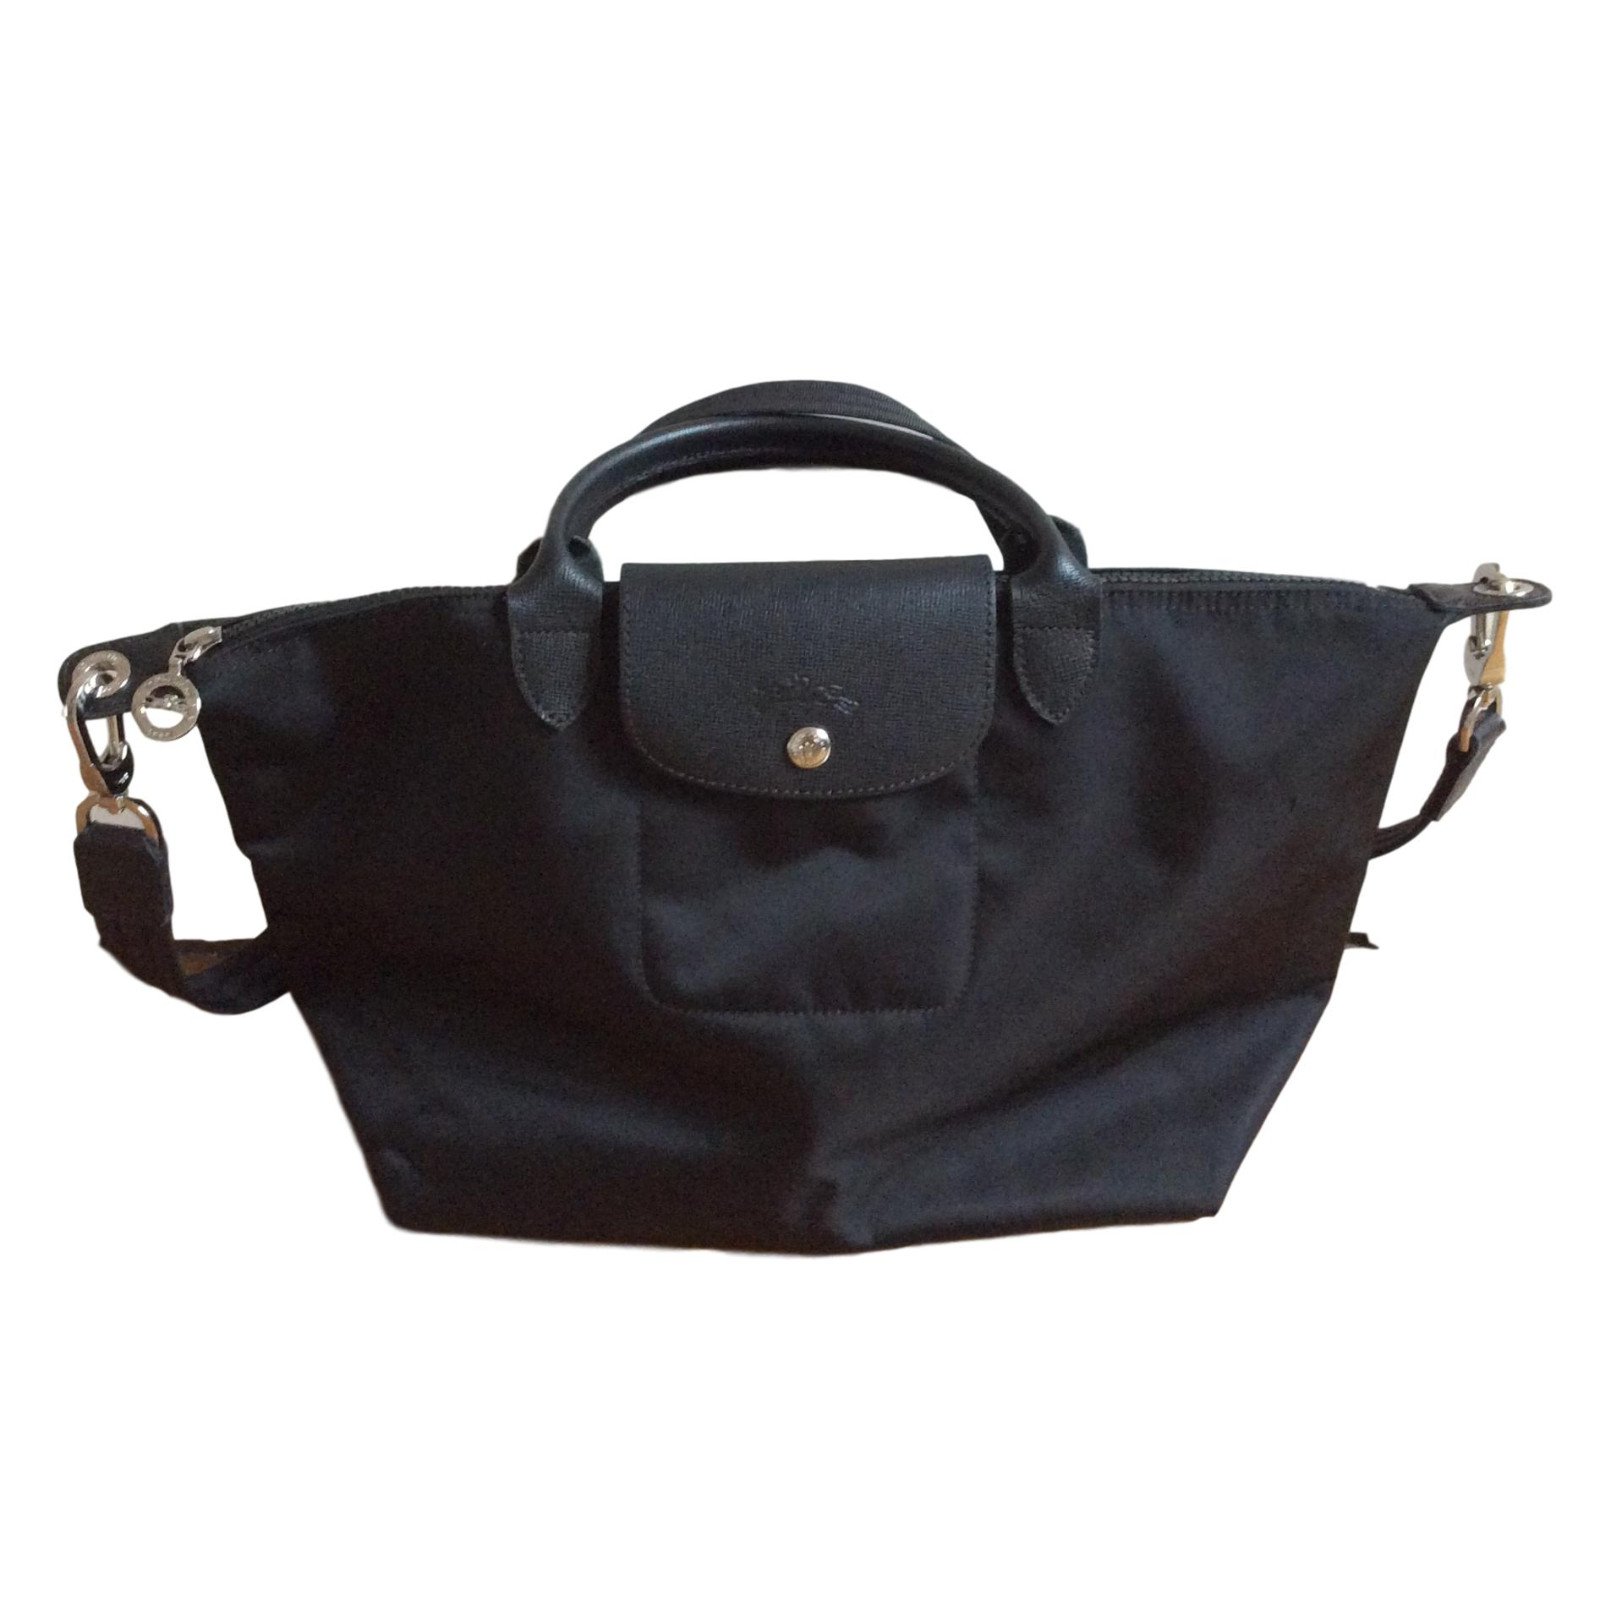 Shopping > dimension sac longchamp taille s, Up to 72% OFF